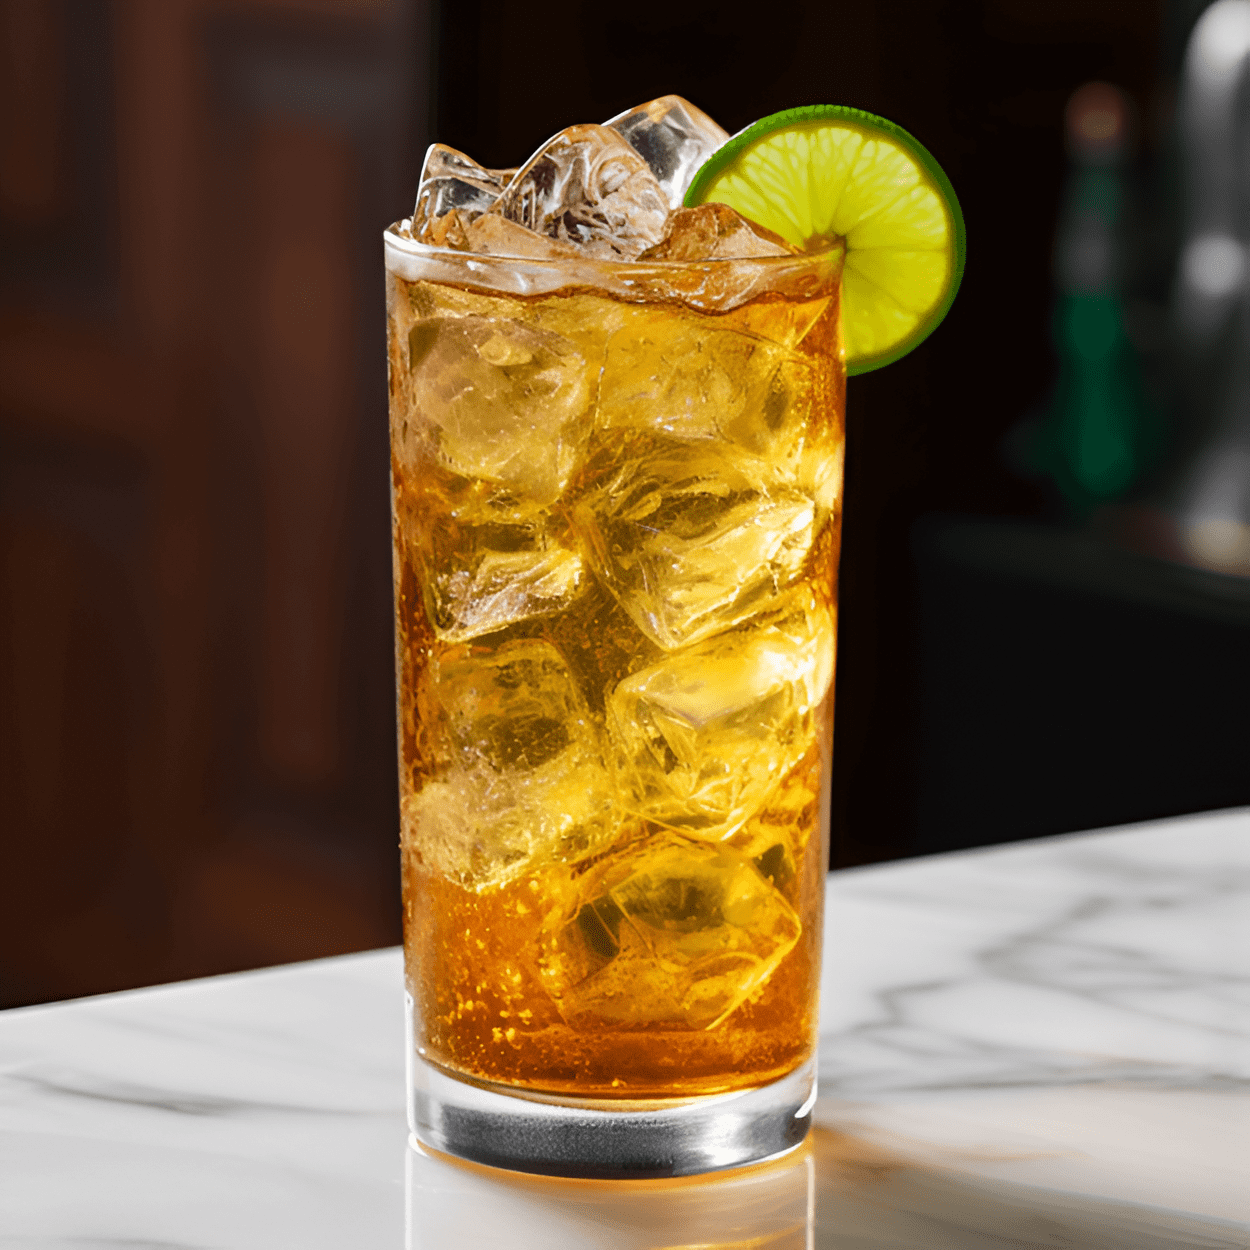 The Parisian Mule has a rich, smooth, and slightly sweet taste. The cognac adds a depth of flavor that is both warming and comforting. The ginger beer gives it a refreshing kick, while the lime juice adds a touch of tartness.